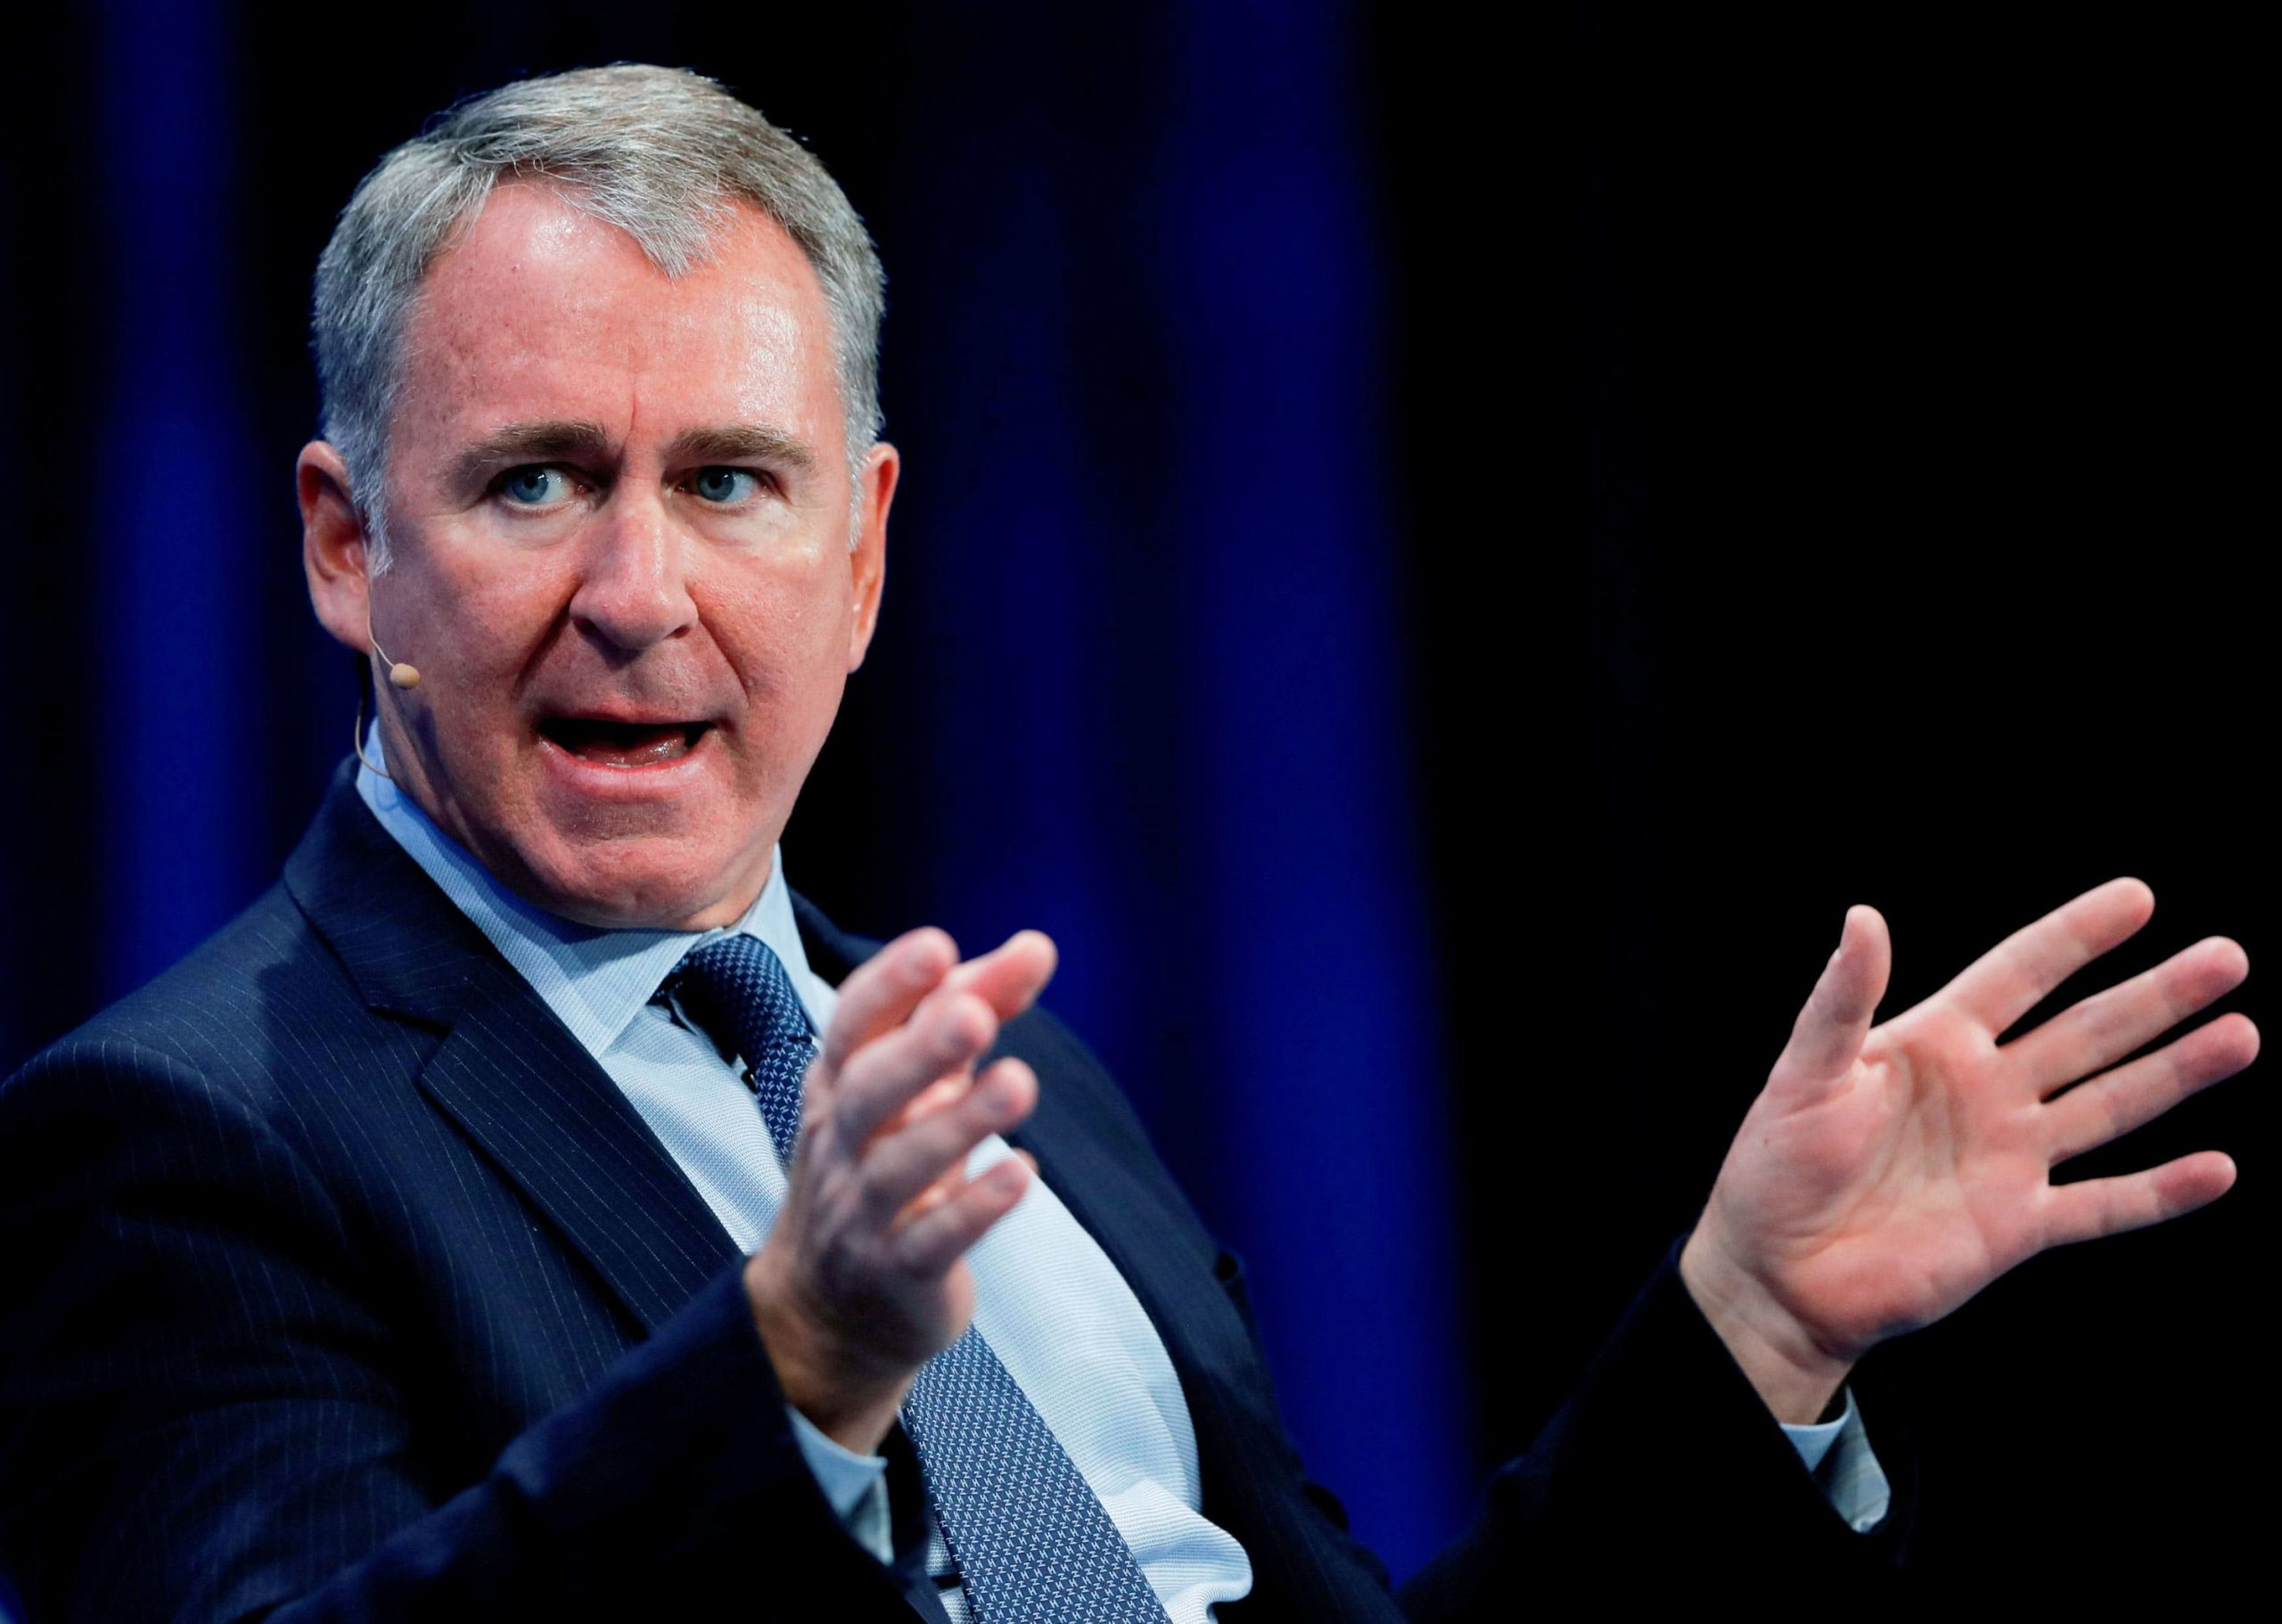 Ken Griffin denies Citadel makes use of private info from retail traders